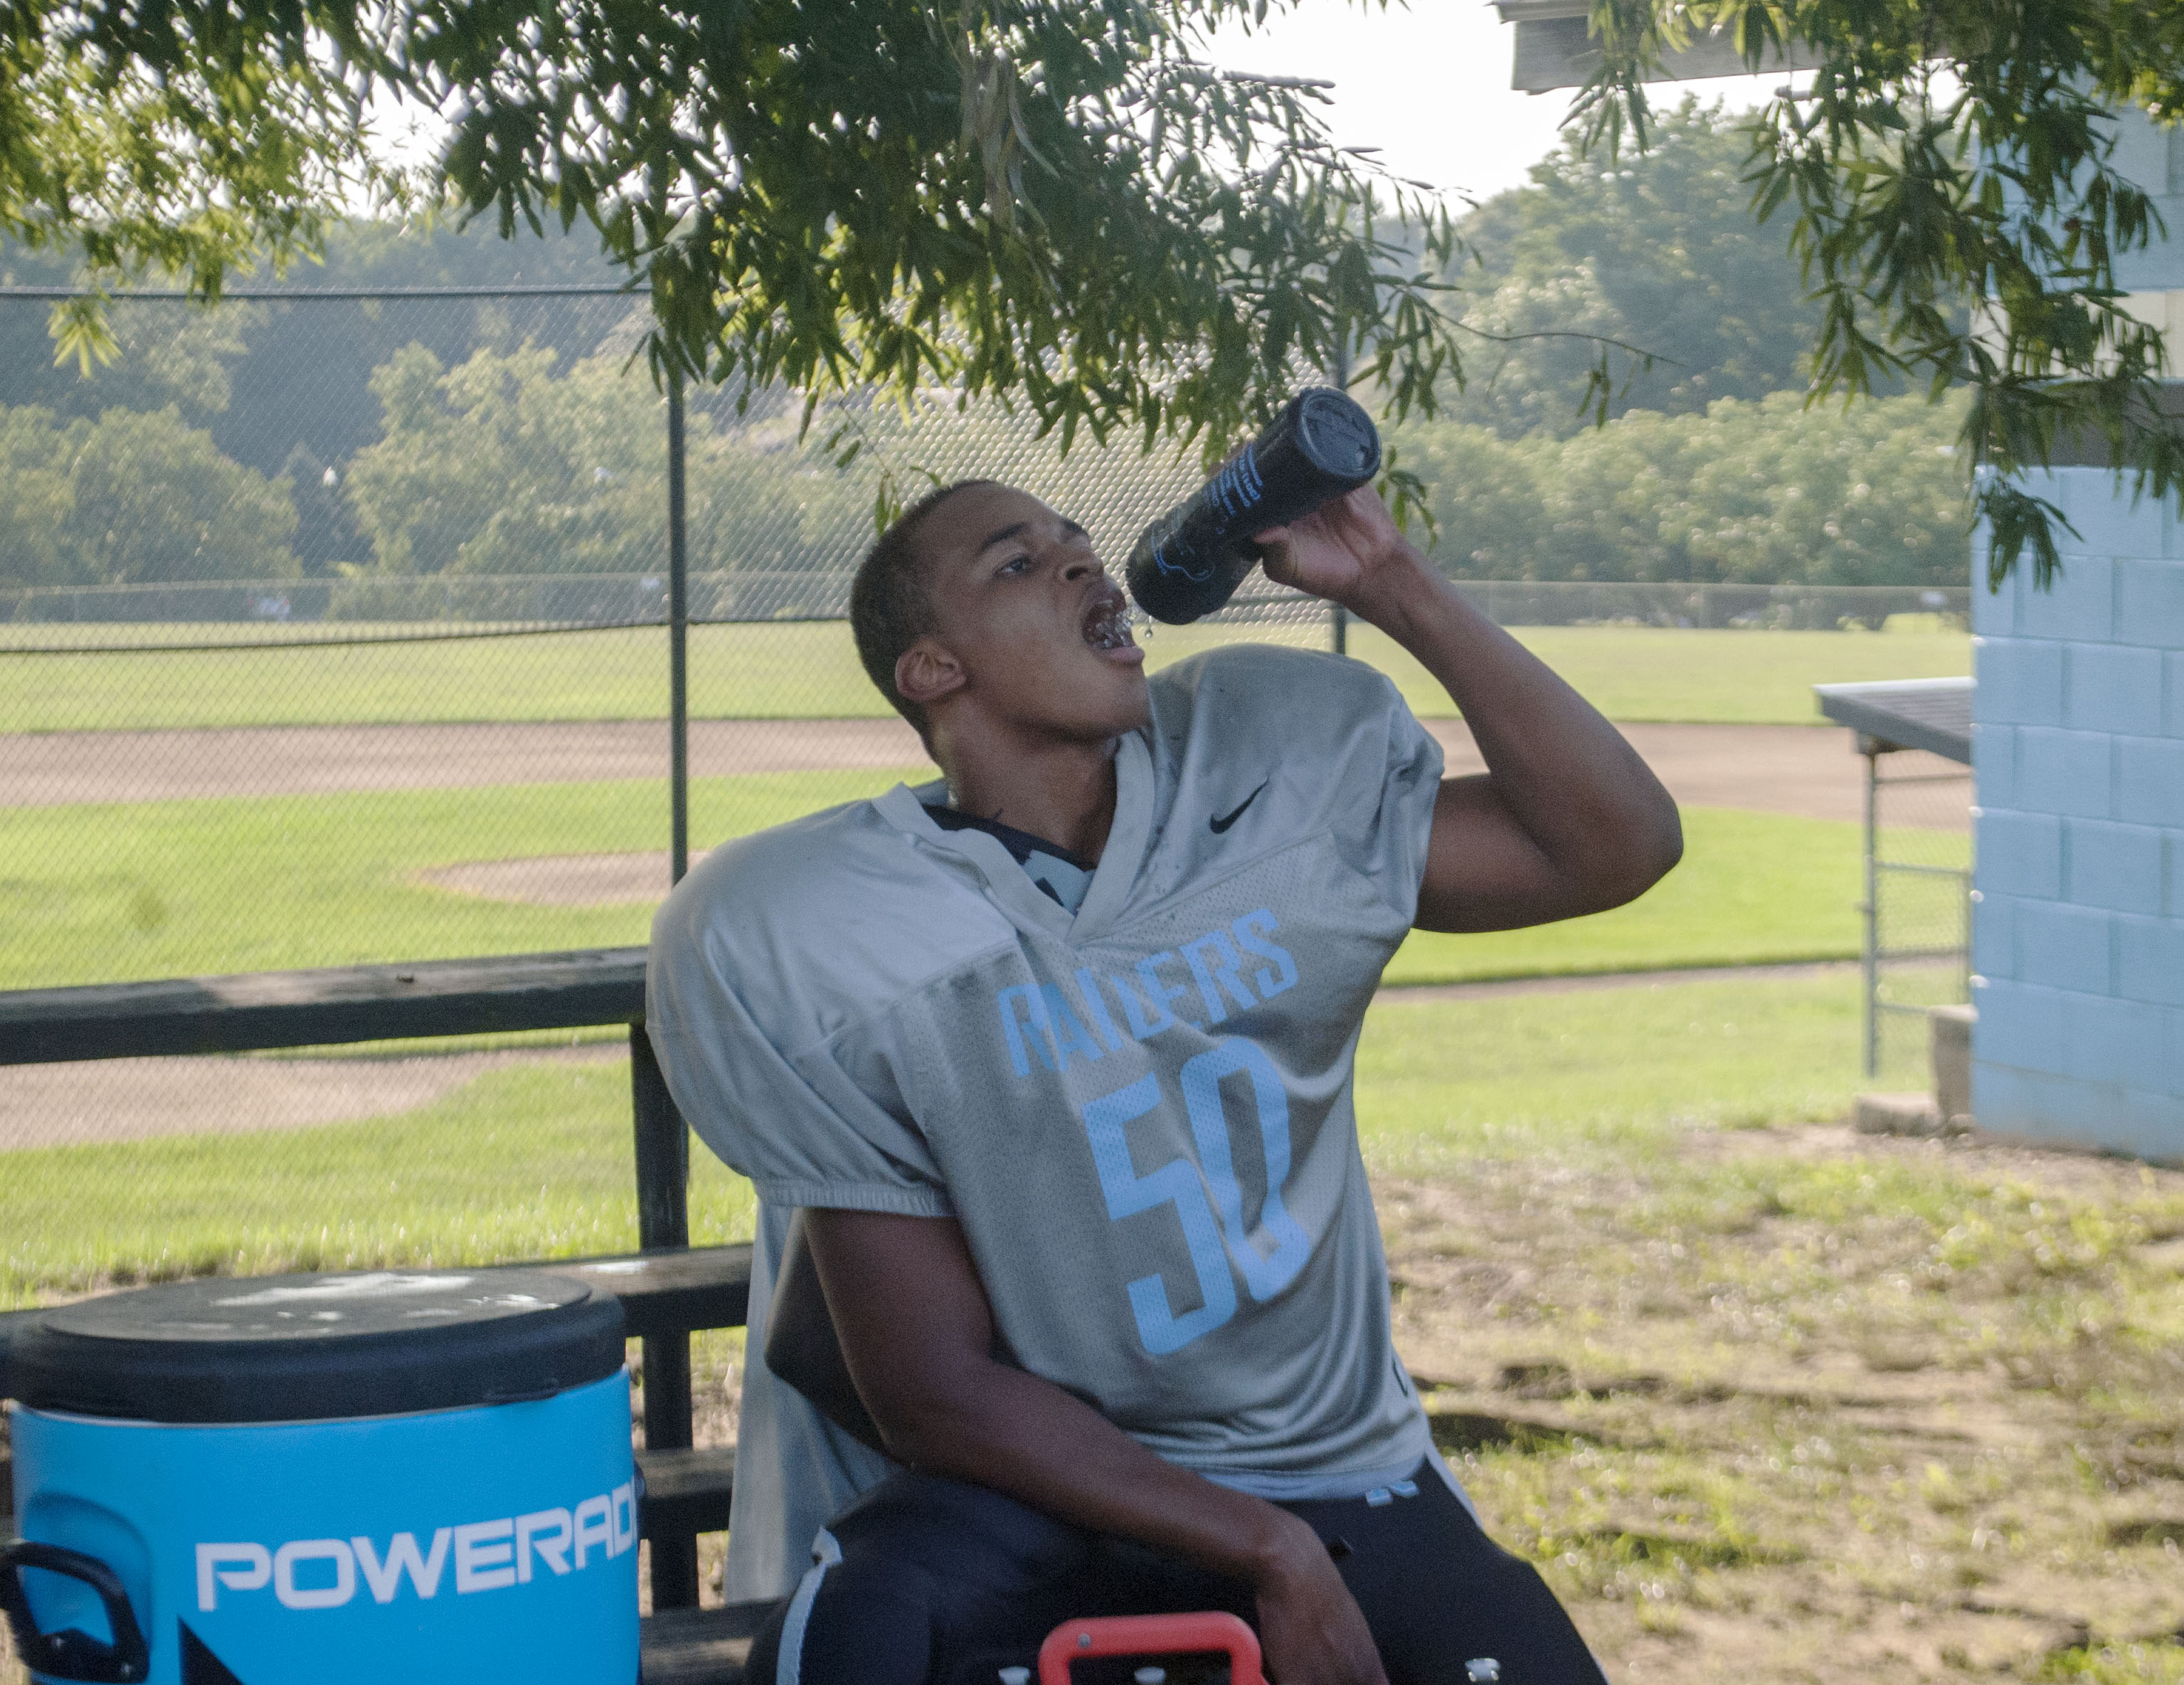 Eleanor Roosevelt High School player Travon Firth takes a water break during practice. (Zach Selby/Capital News Service)